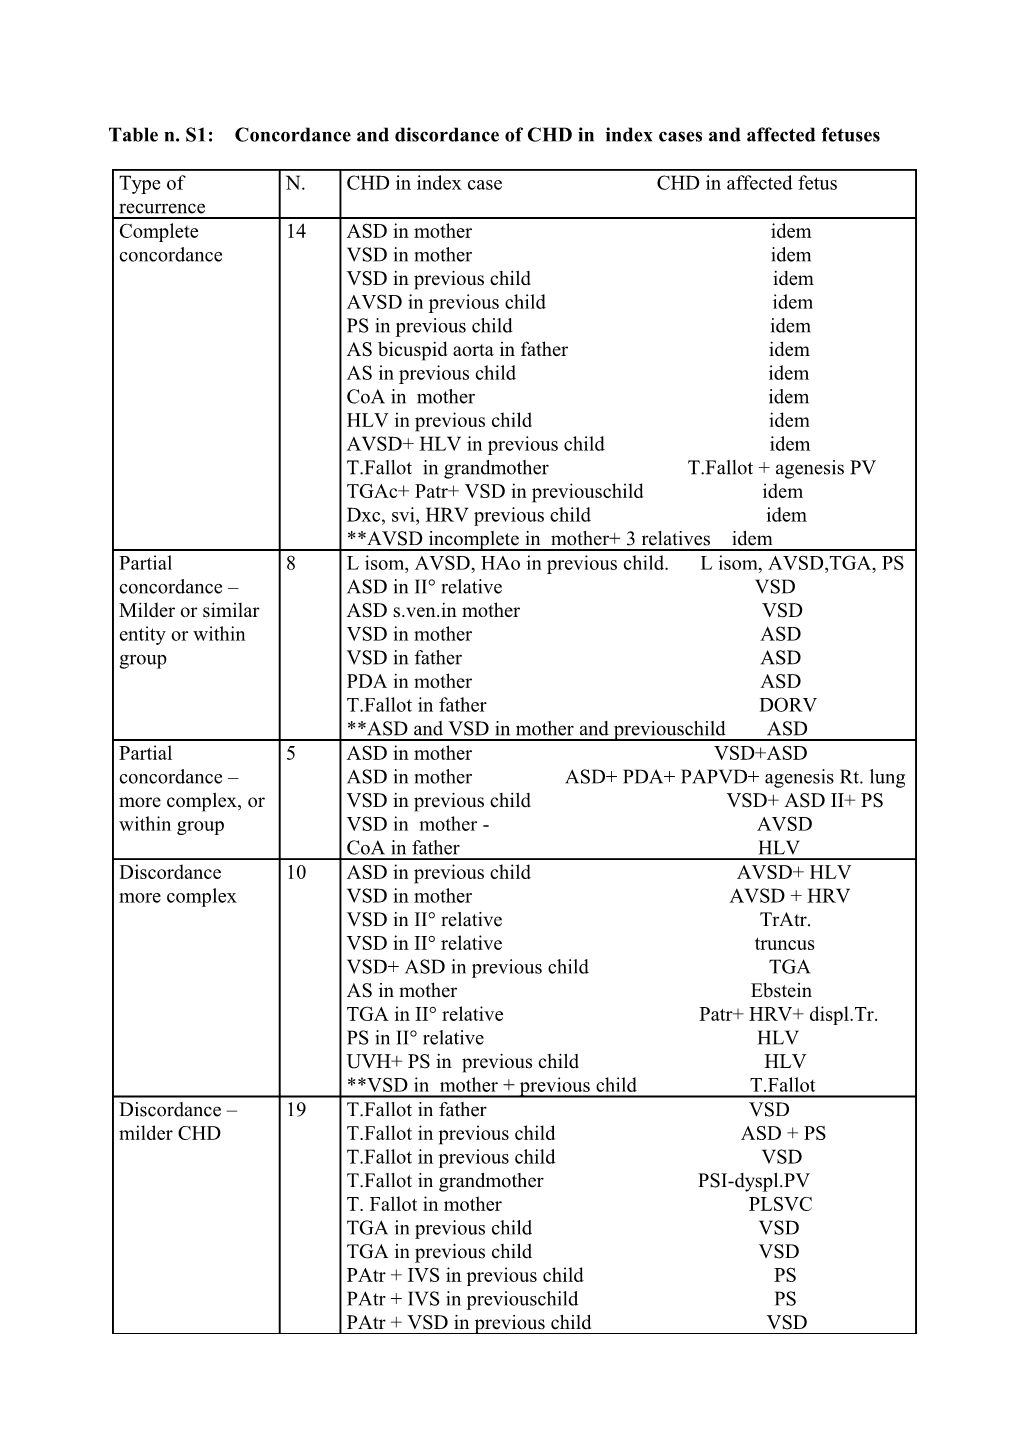 Table N. S1: Concordance and Discordance of CHD in Index Cases and Affected Fetuses